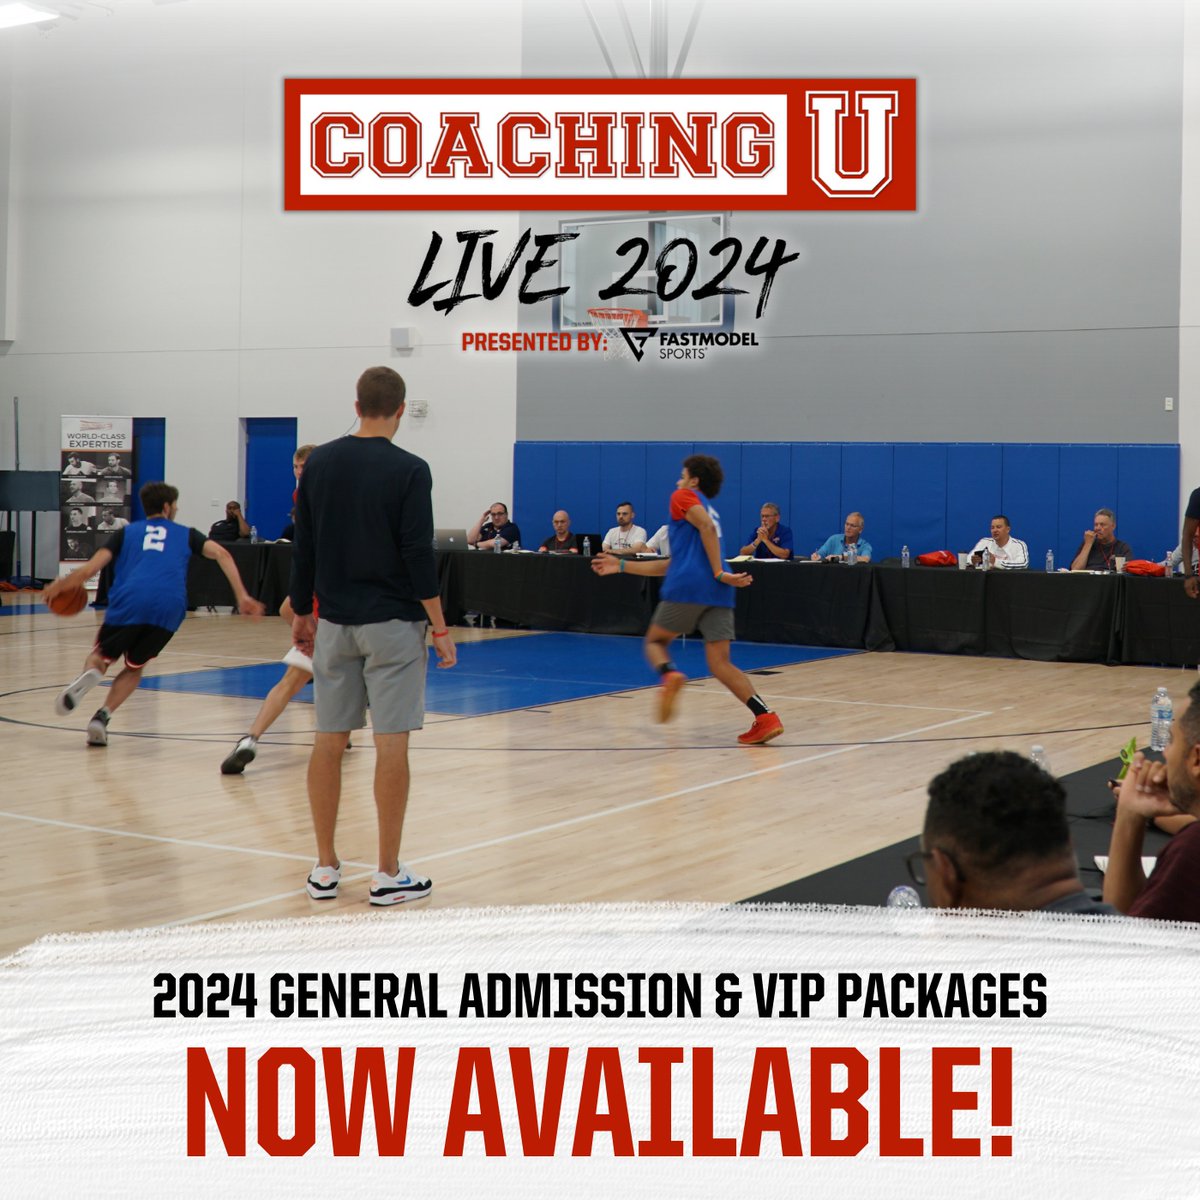 🏀 Join us in Las Vegas this summer for Coaching U Live 2024 pres. by @fastmodel 3️⃣ Ways to Attend This Year: ✍️ In Person: $225 👔 VIP Package: $350 💻 Livestream: $129 🗓️ July 13-14, 2024 📍 Las Vegas, NV 🎟️ Registration is now open: 🔗 coachingulive.com/2024